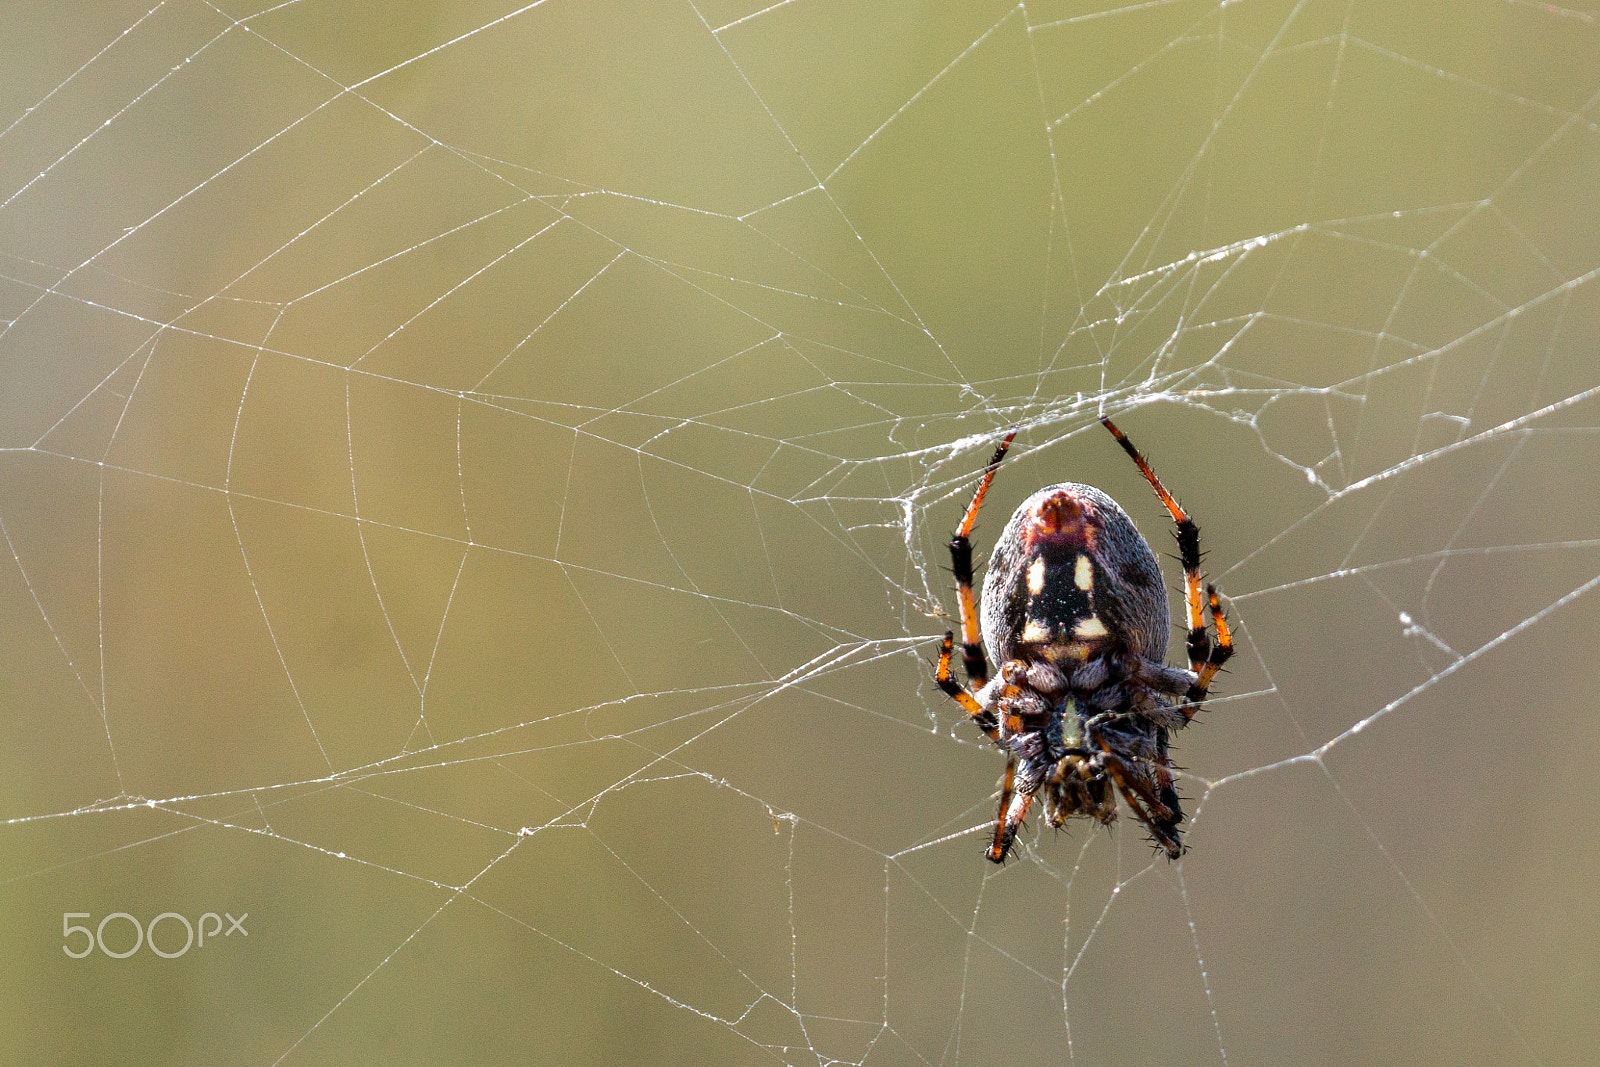 Sony SLT-A77 sample photo. An orb weaver spider on web photography